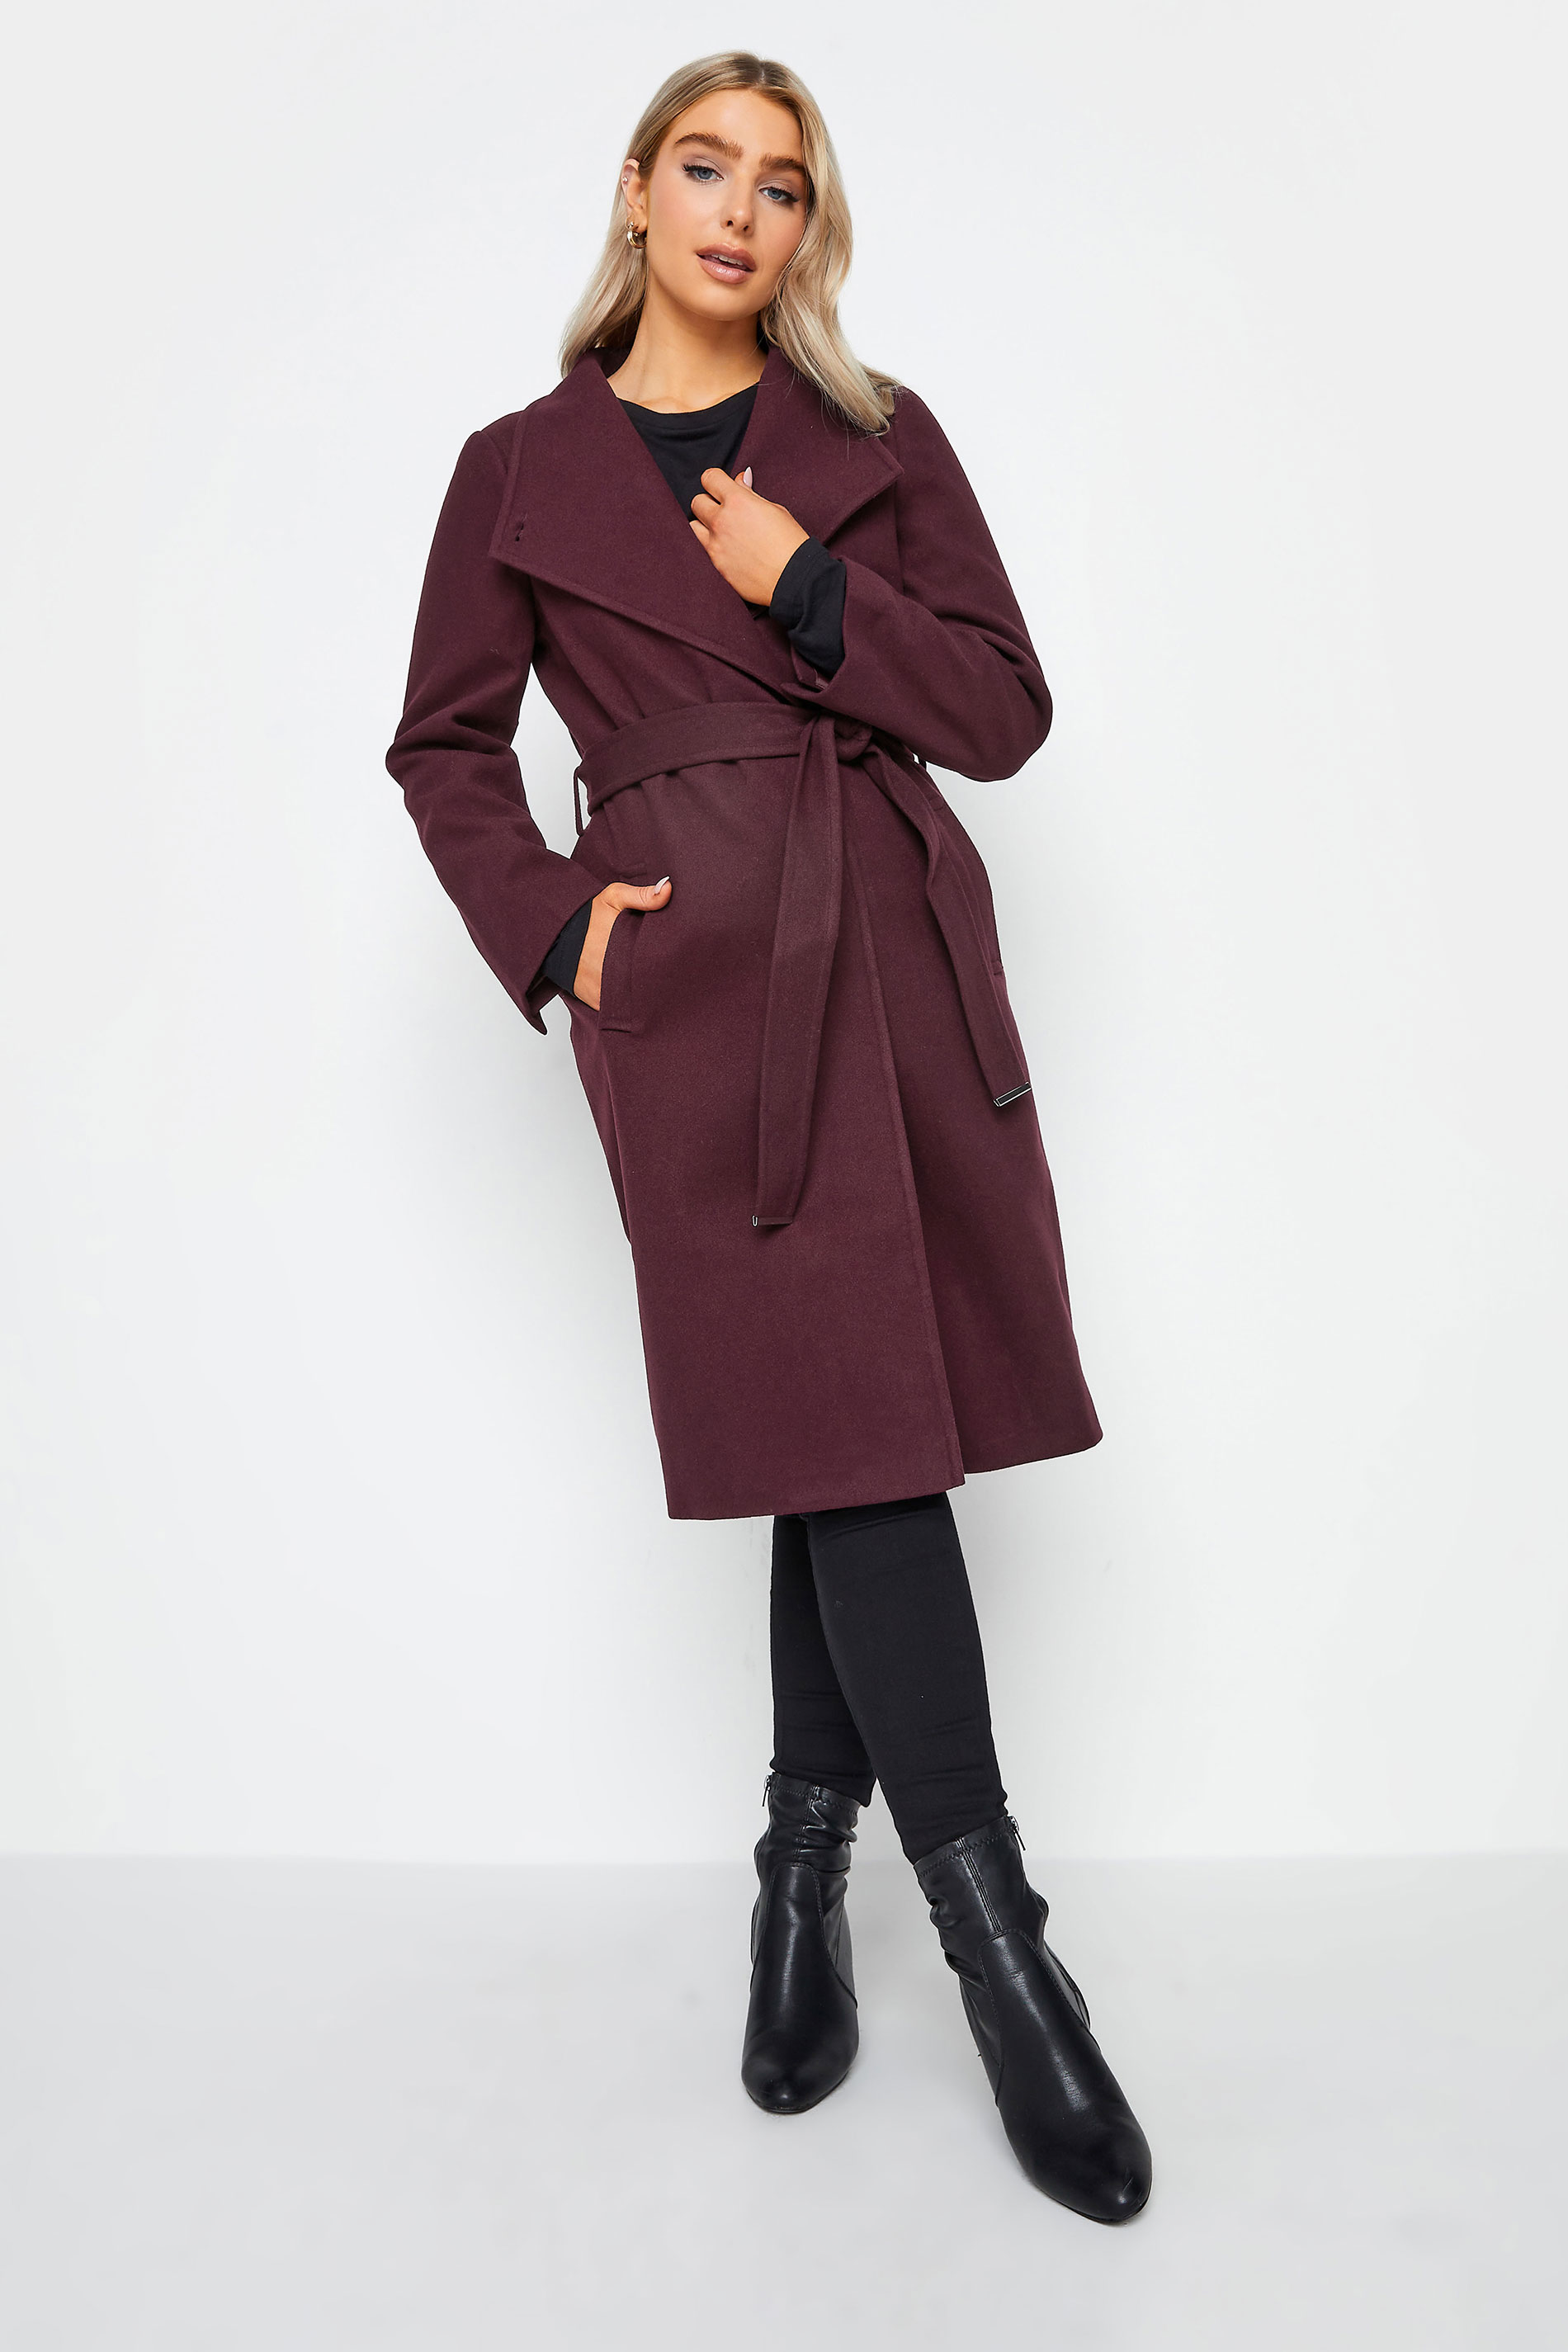 M&Co Wine Red Belted Formal Coat | M&Co 1